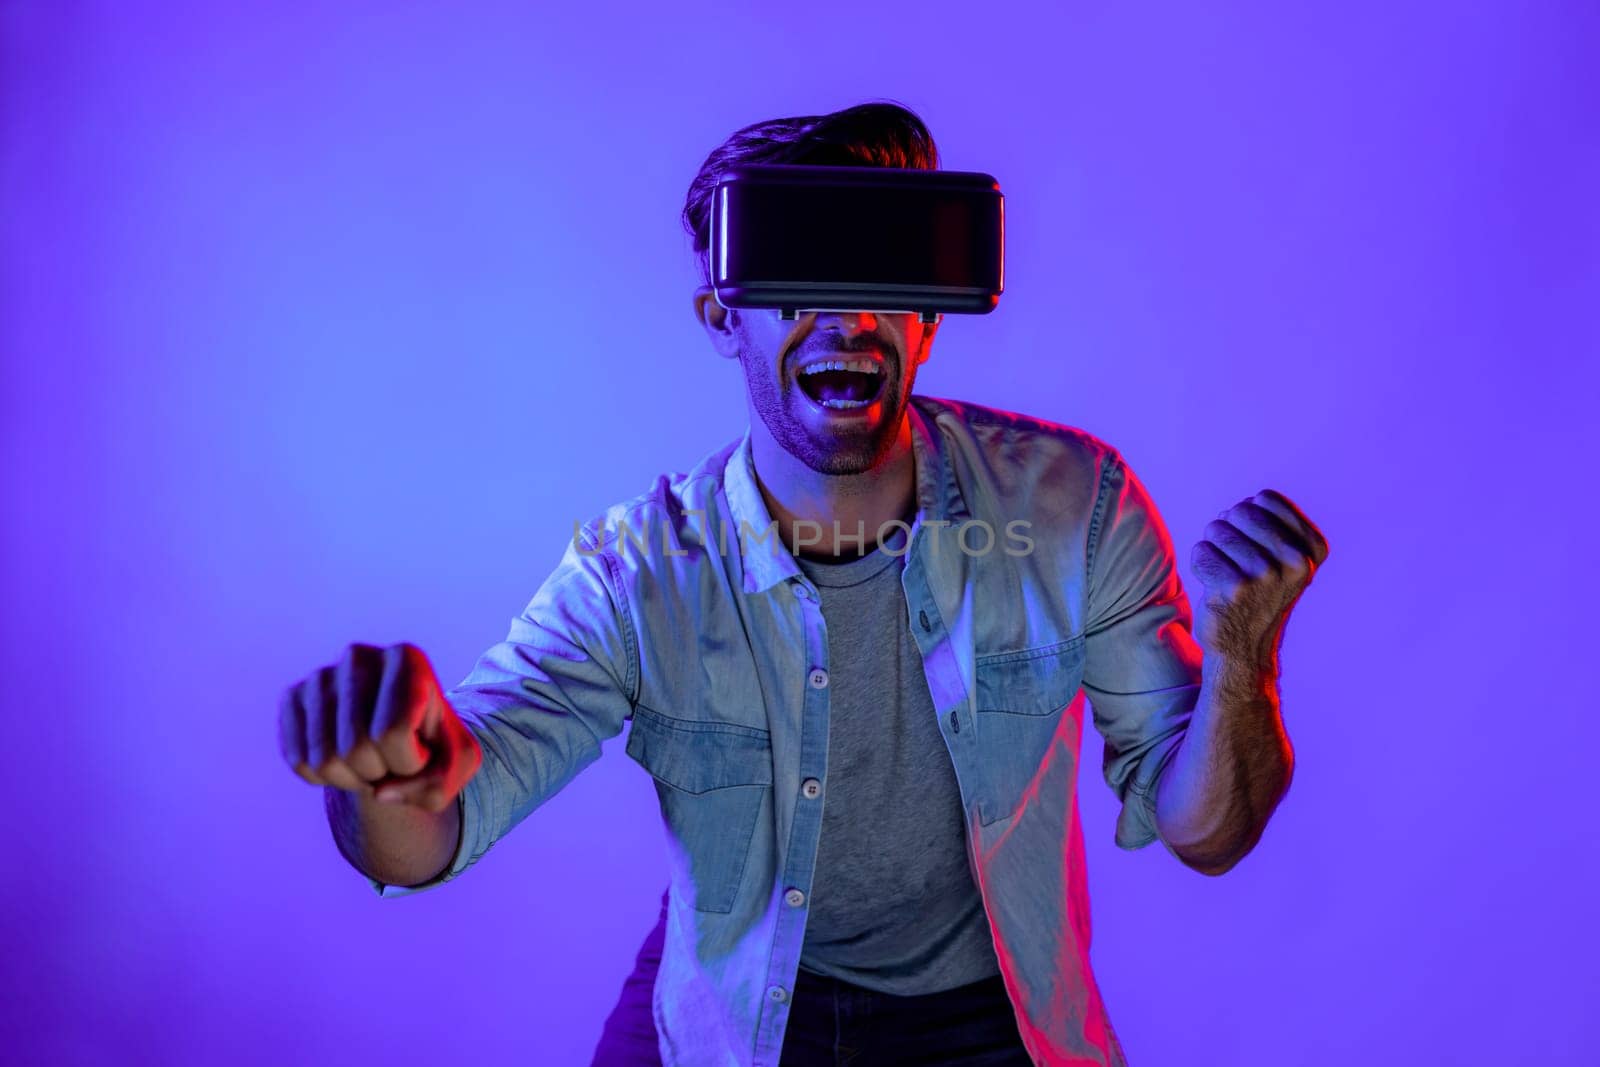 Smart man wear virtual goggle while move driving car hand gesture. Caucasian teenager using futuristic digital technology to enter virtual world while standing at colorful neon background. Deviation.